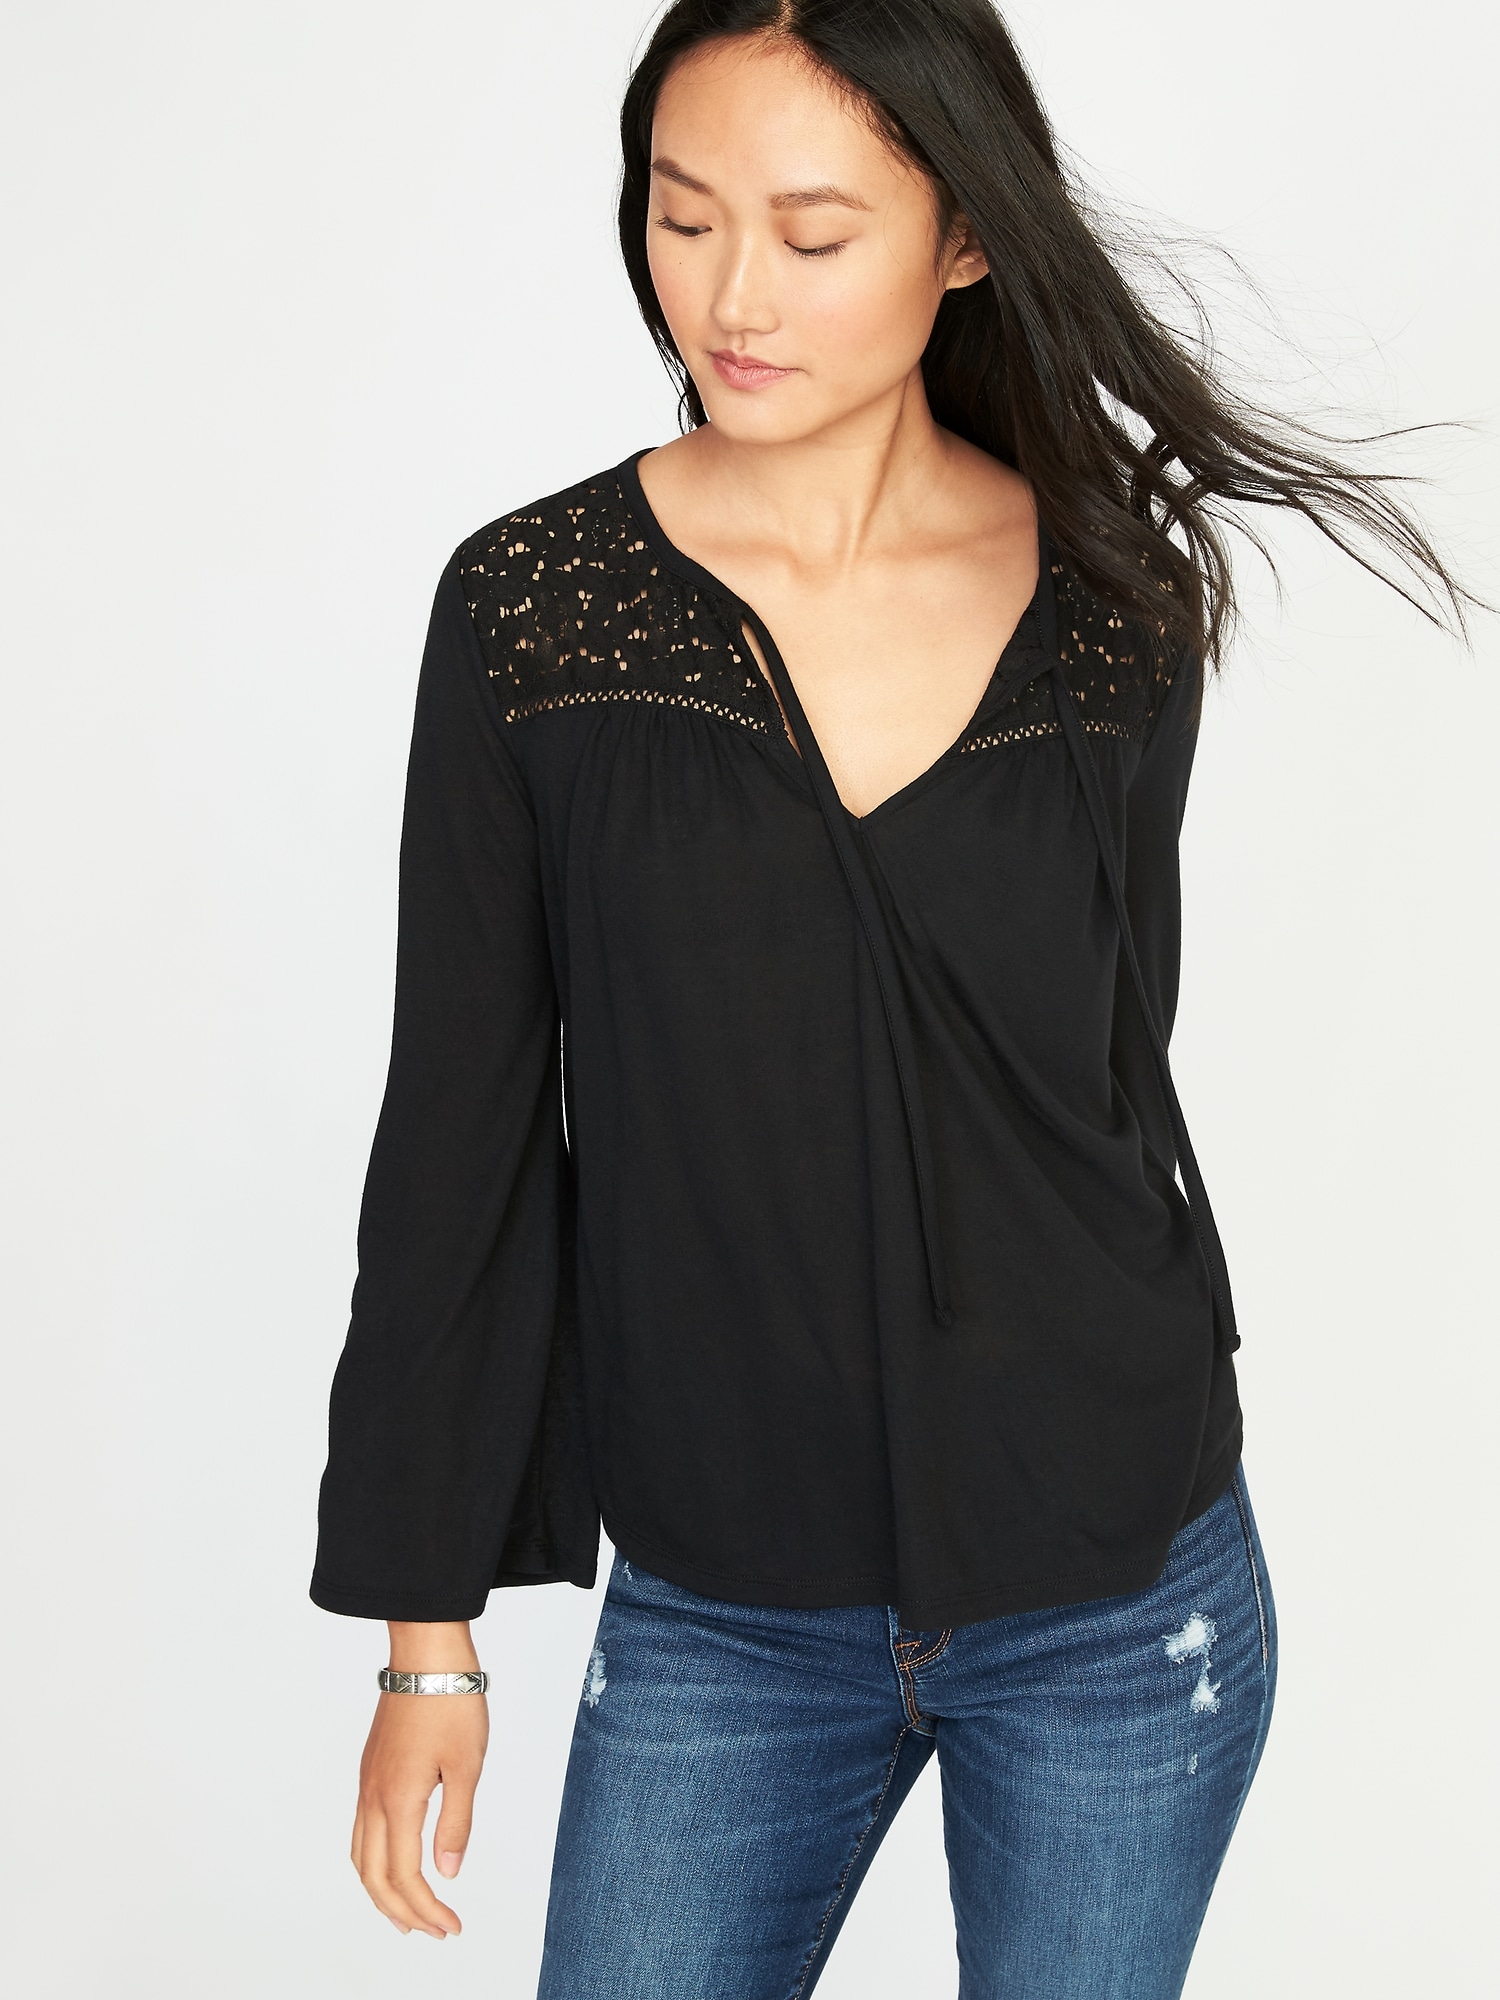 Lace-Yoke Tie-Neck Top for Women | Old Navy